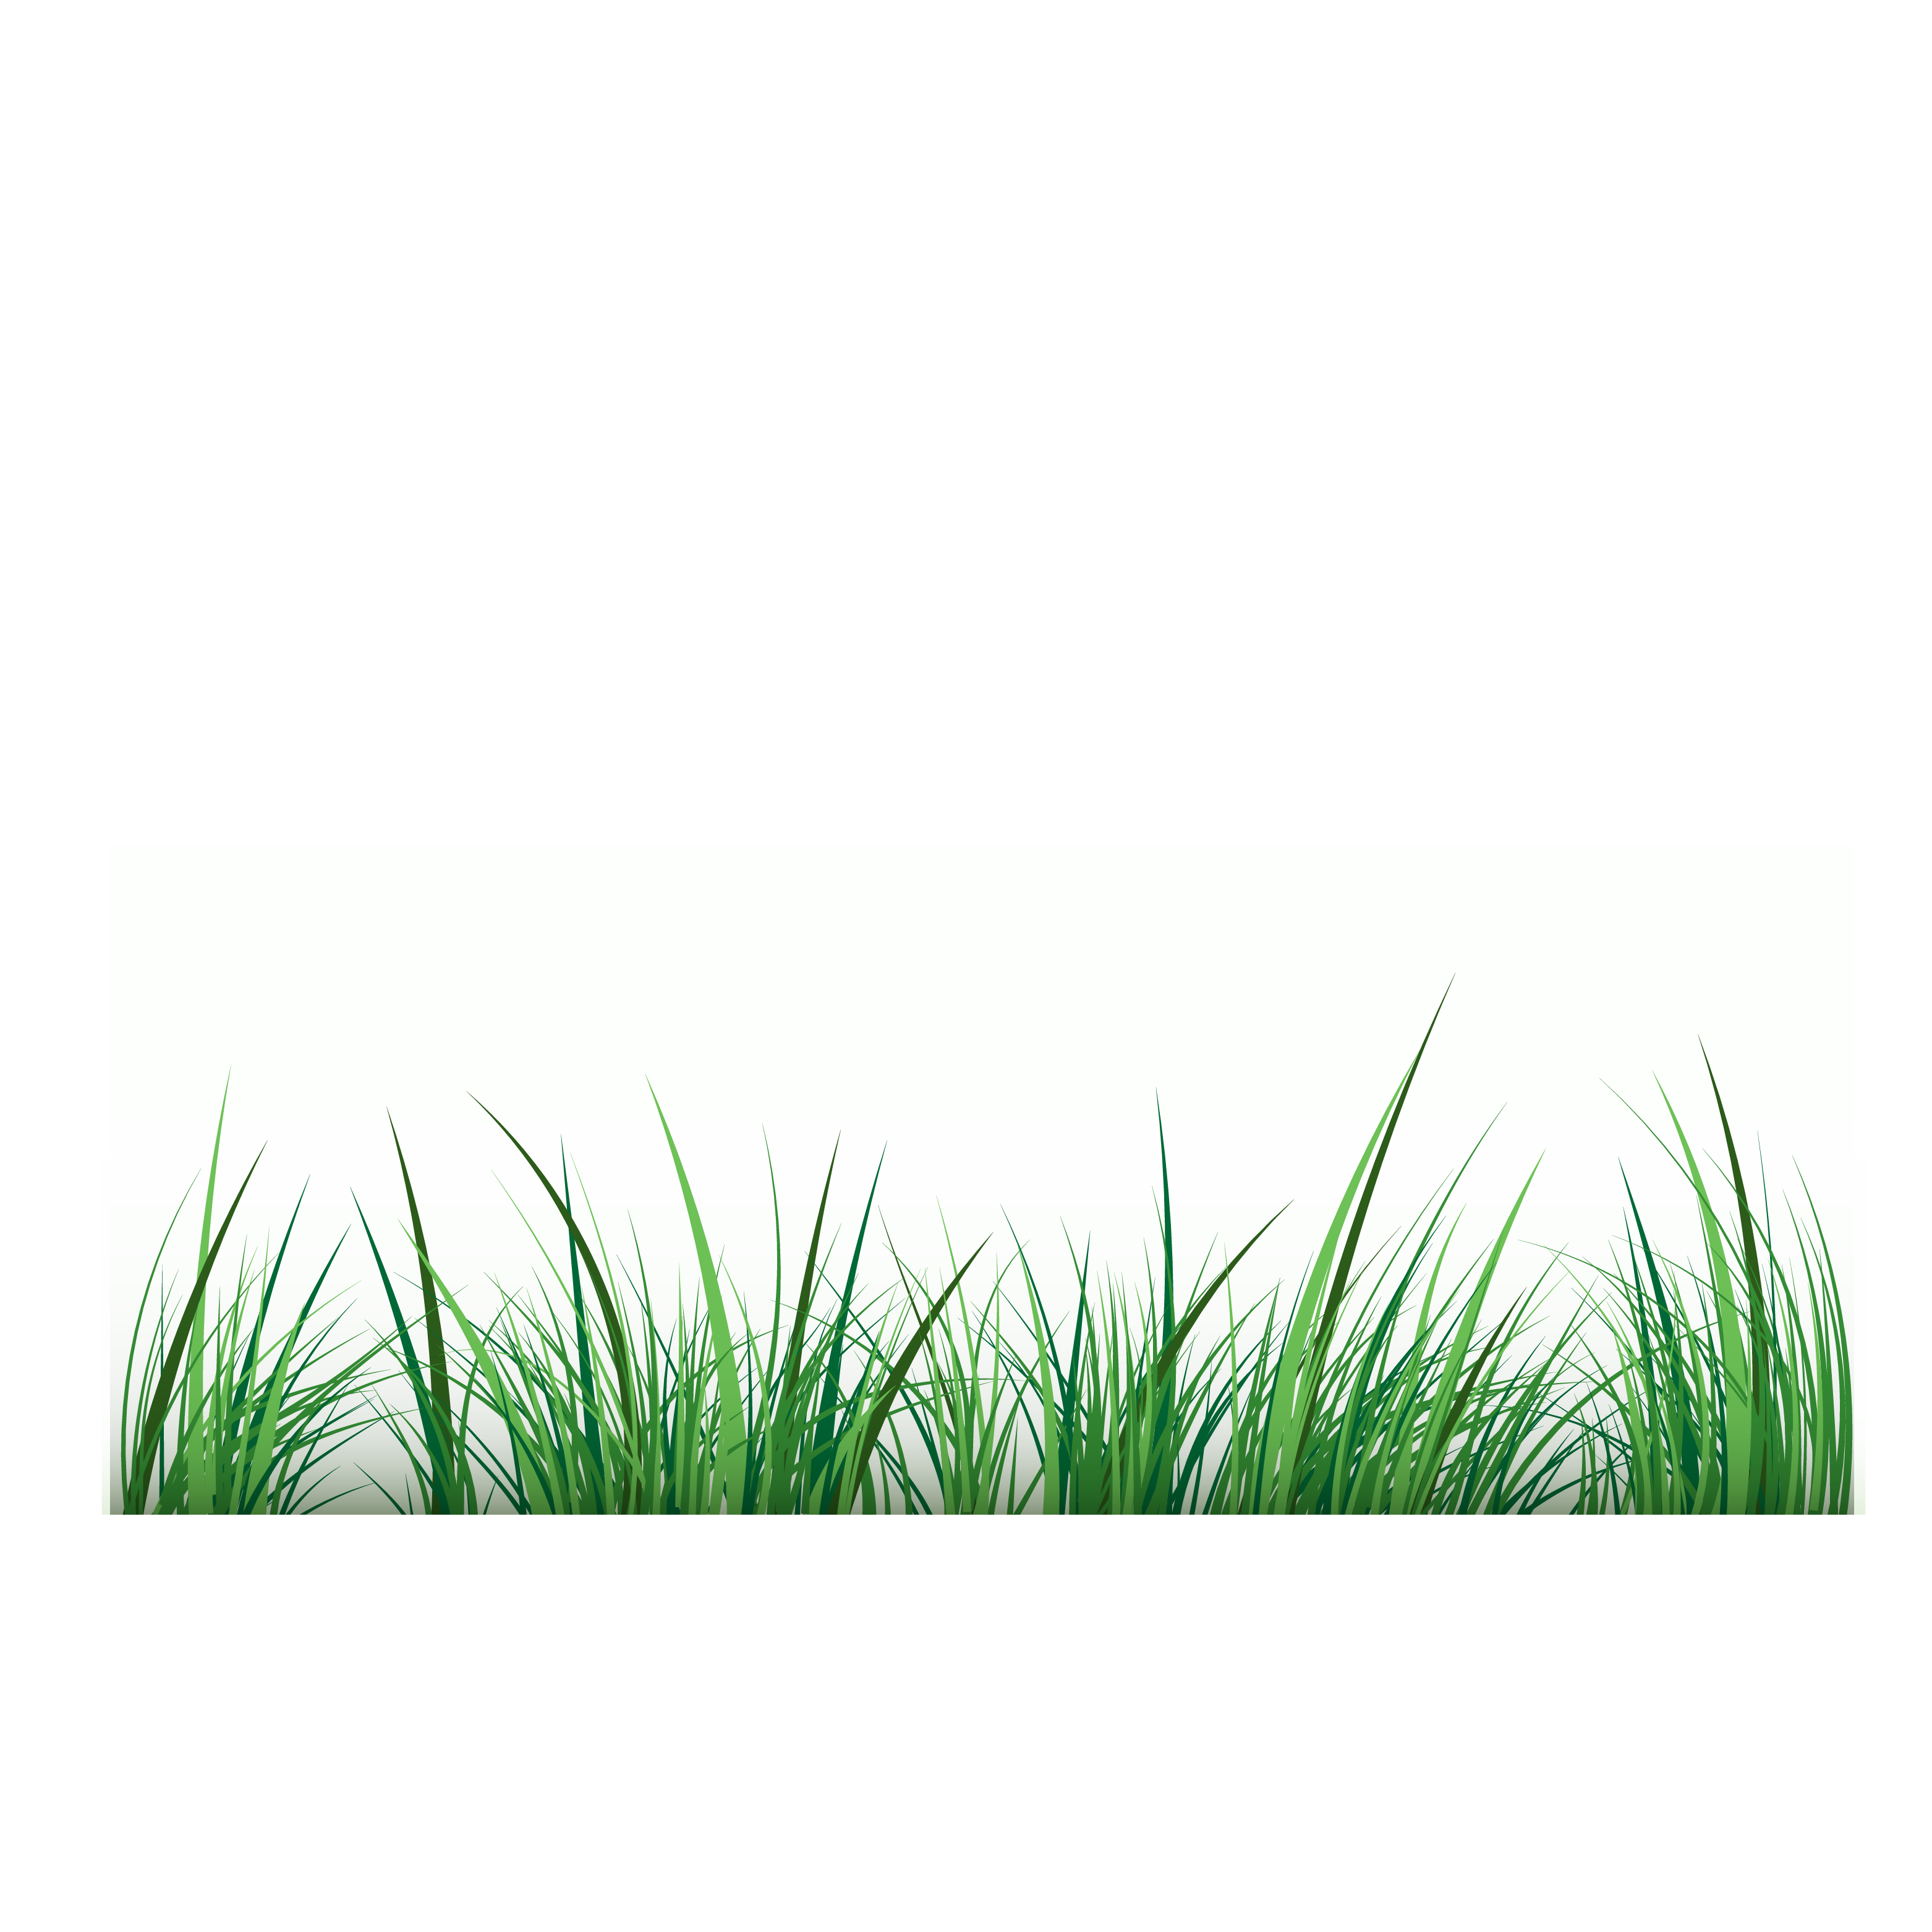 Grass Vector Png At Vectorifiedcom Collection Of Grass Vector Png Images